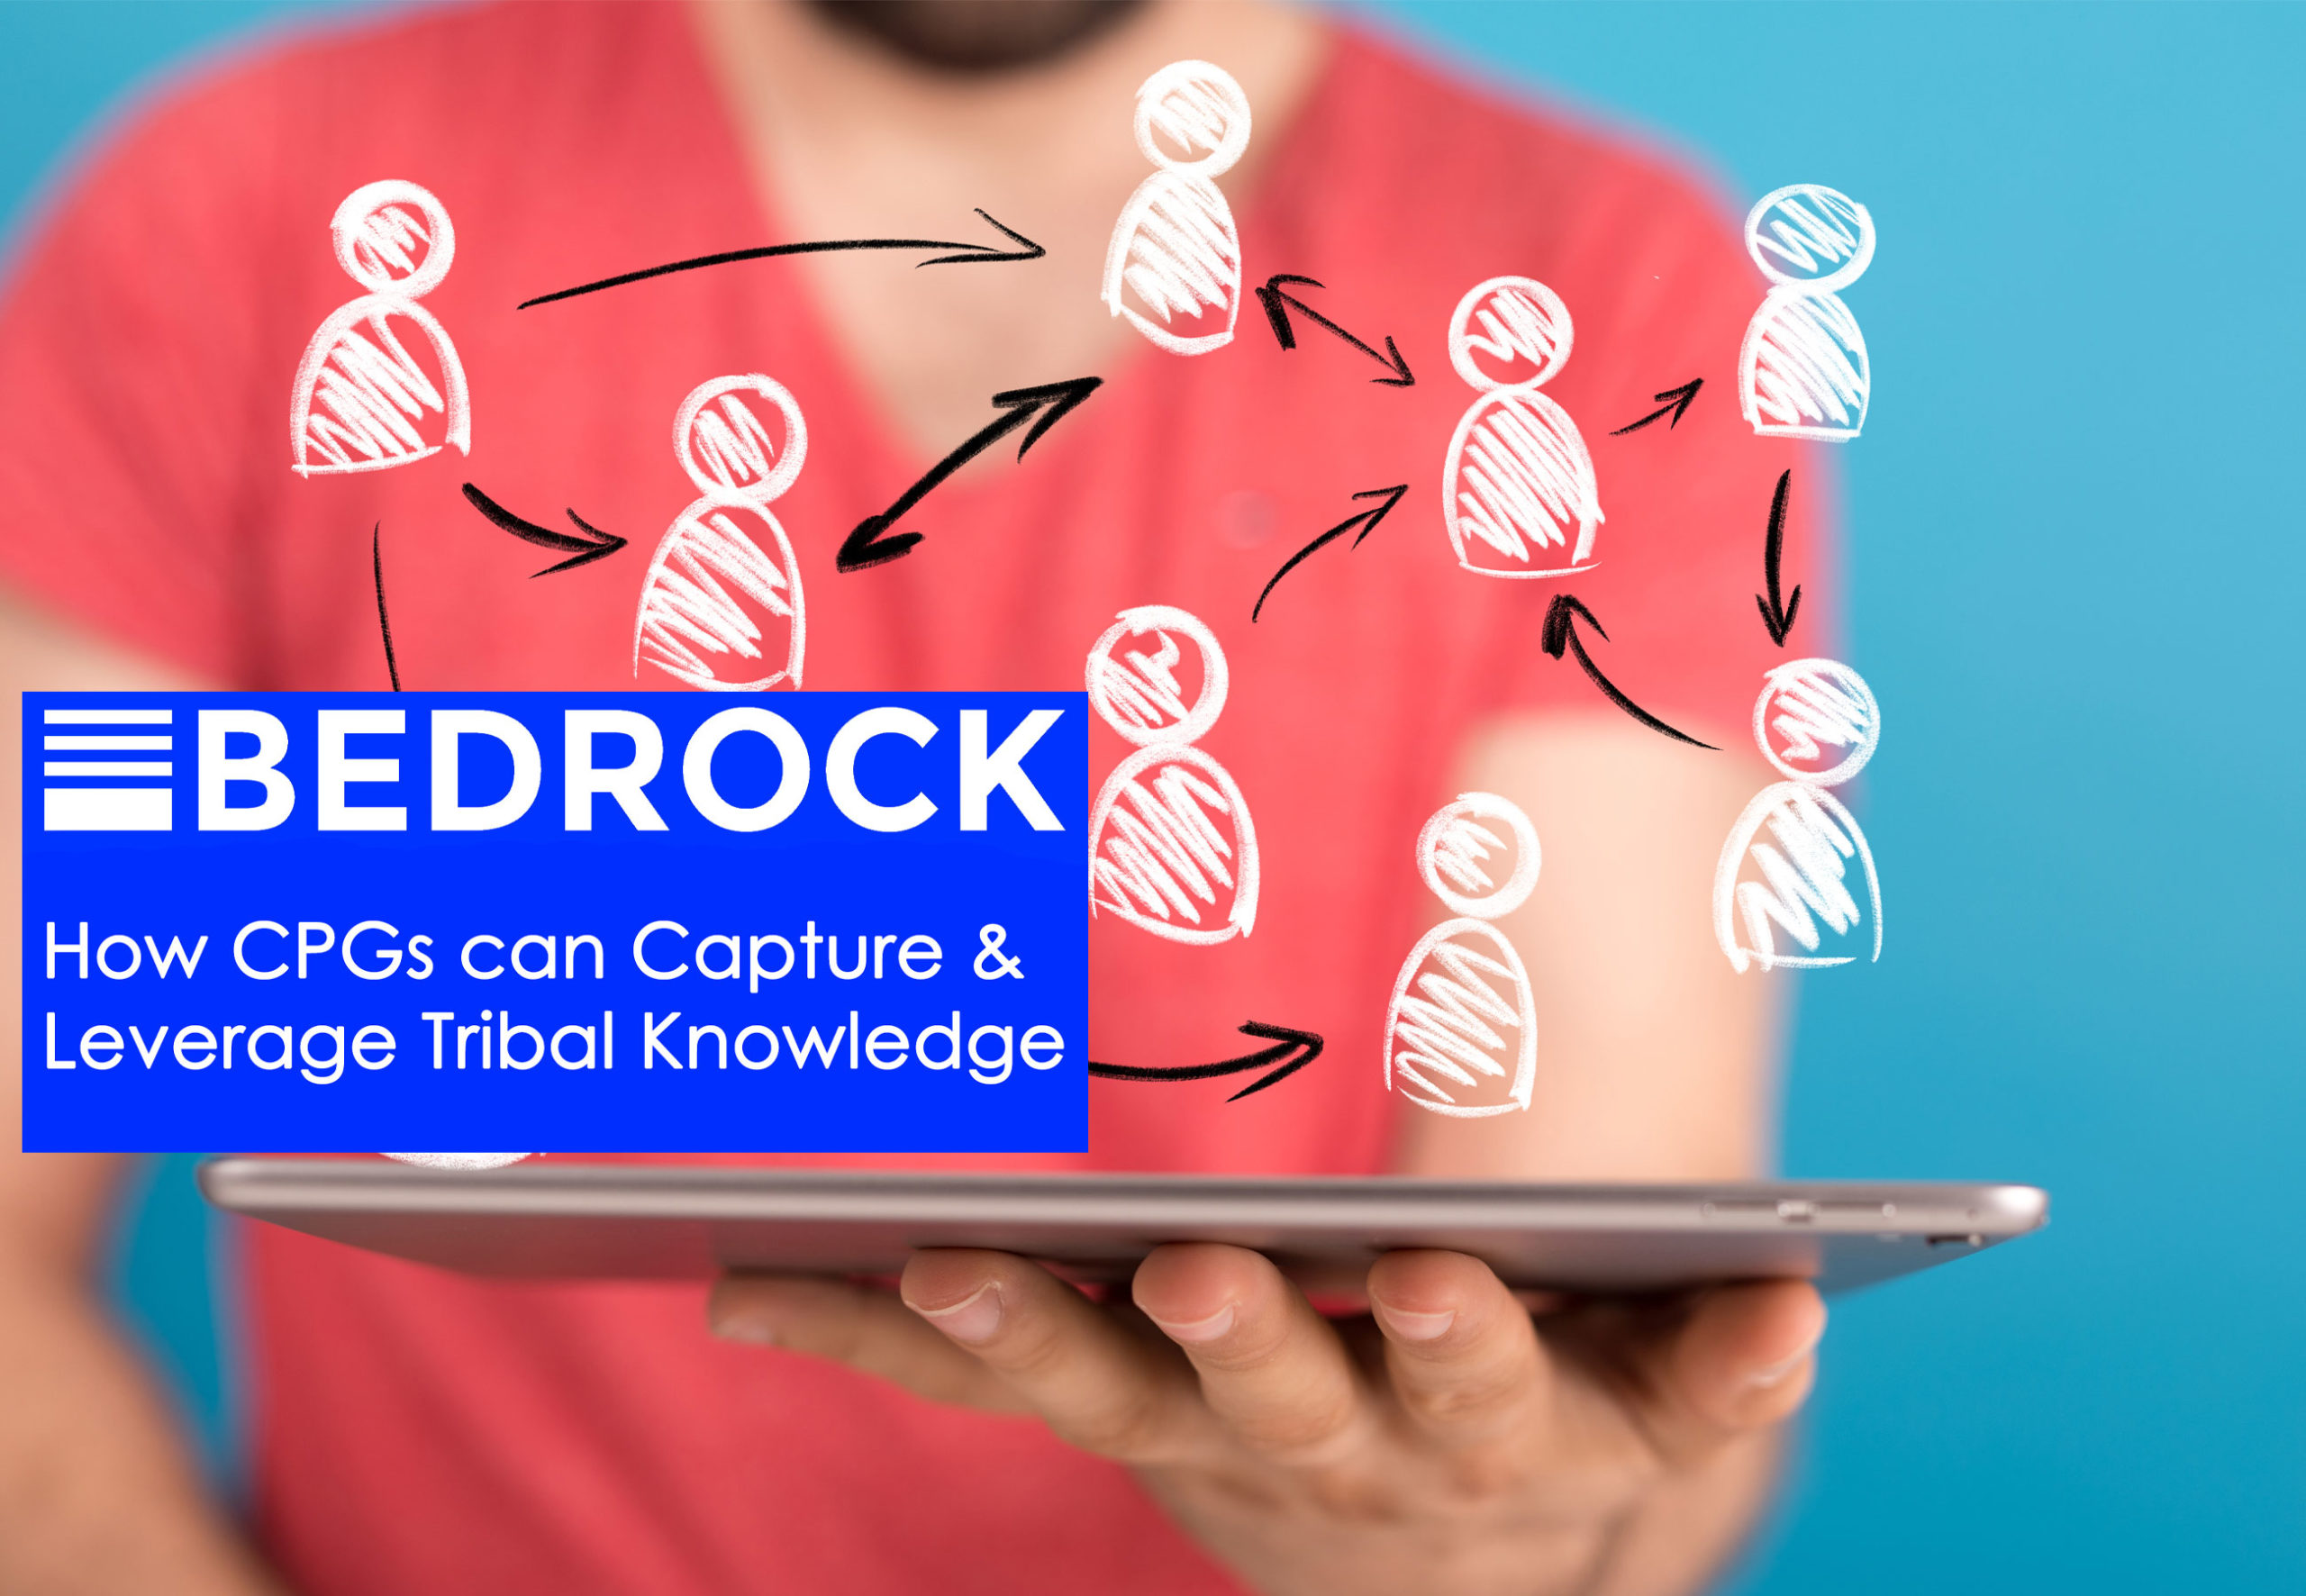 CPG organizations face unique barriers to preserving their valuable tribal knowledge. Thankfully, Bedrock Analytics has a solution for overcoming them.